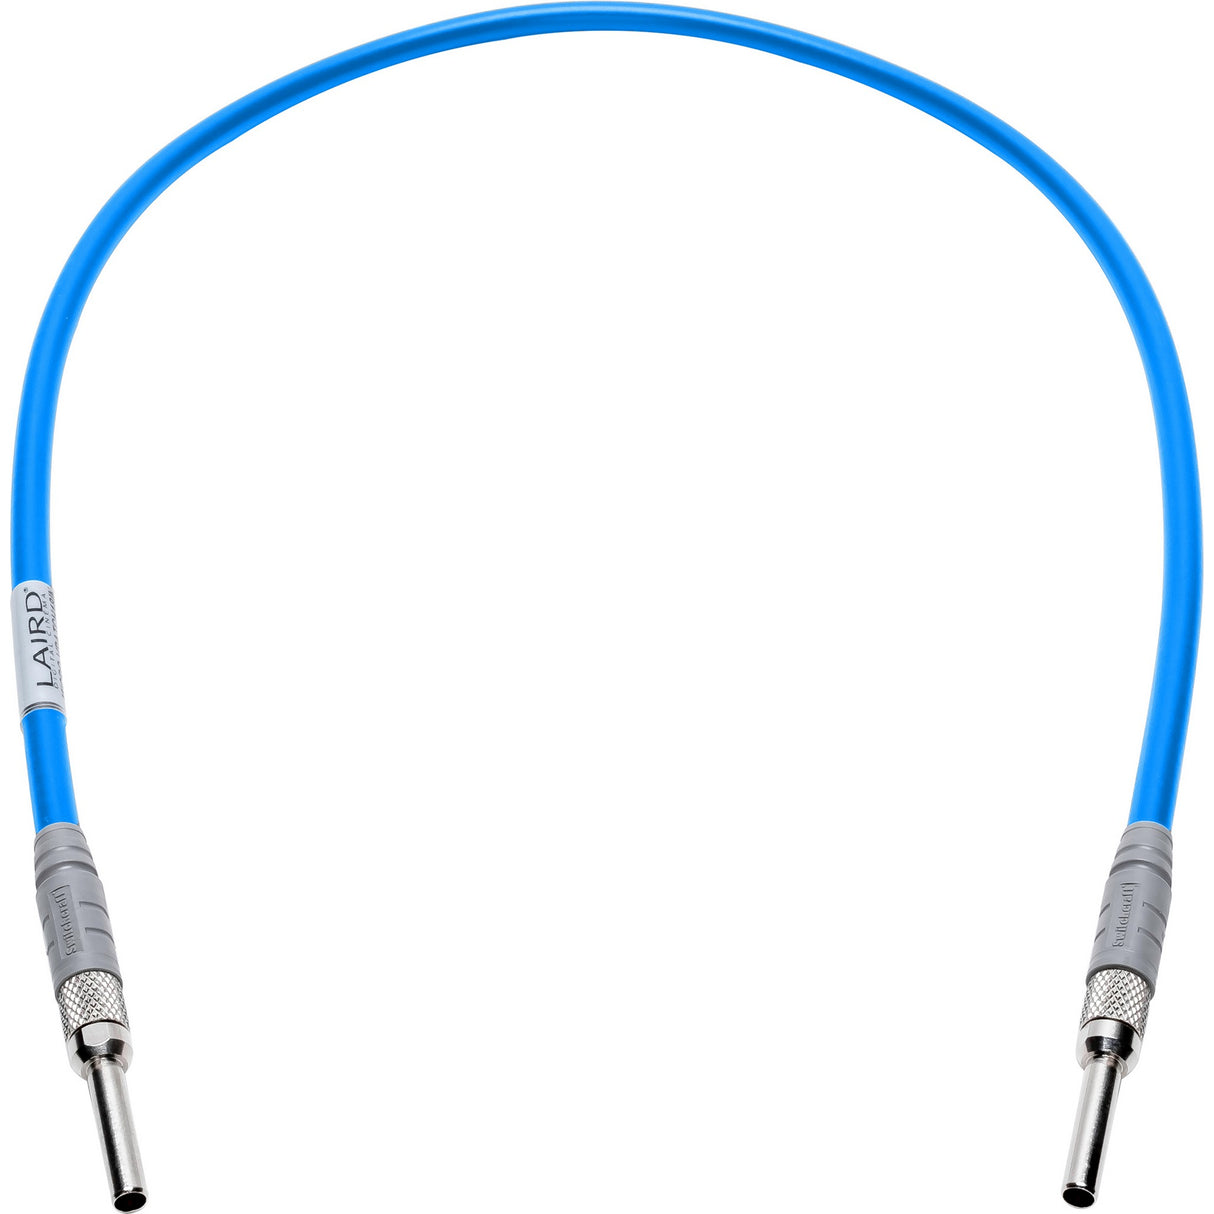 Laird MICRO-VPATCH-006BE 12G-SDI Micro Video Patch Cable, Light Blue, 6-Feet